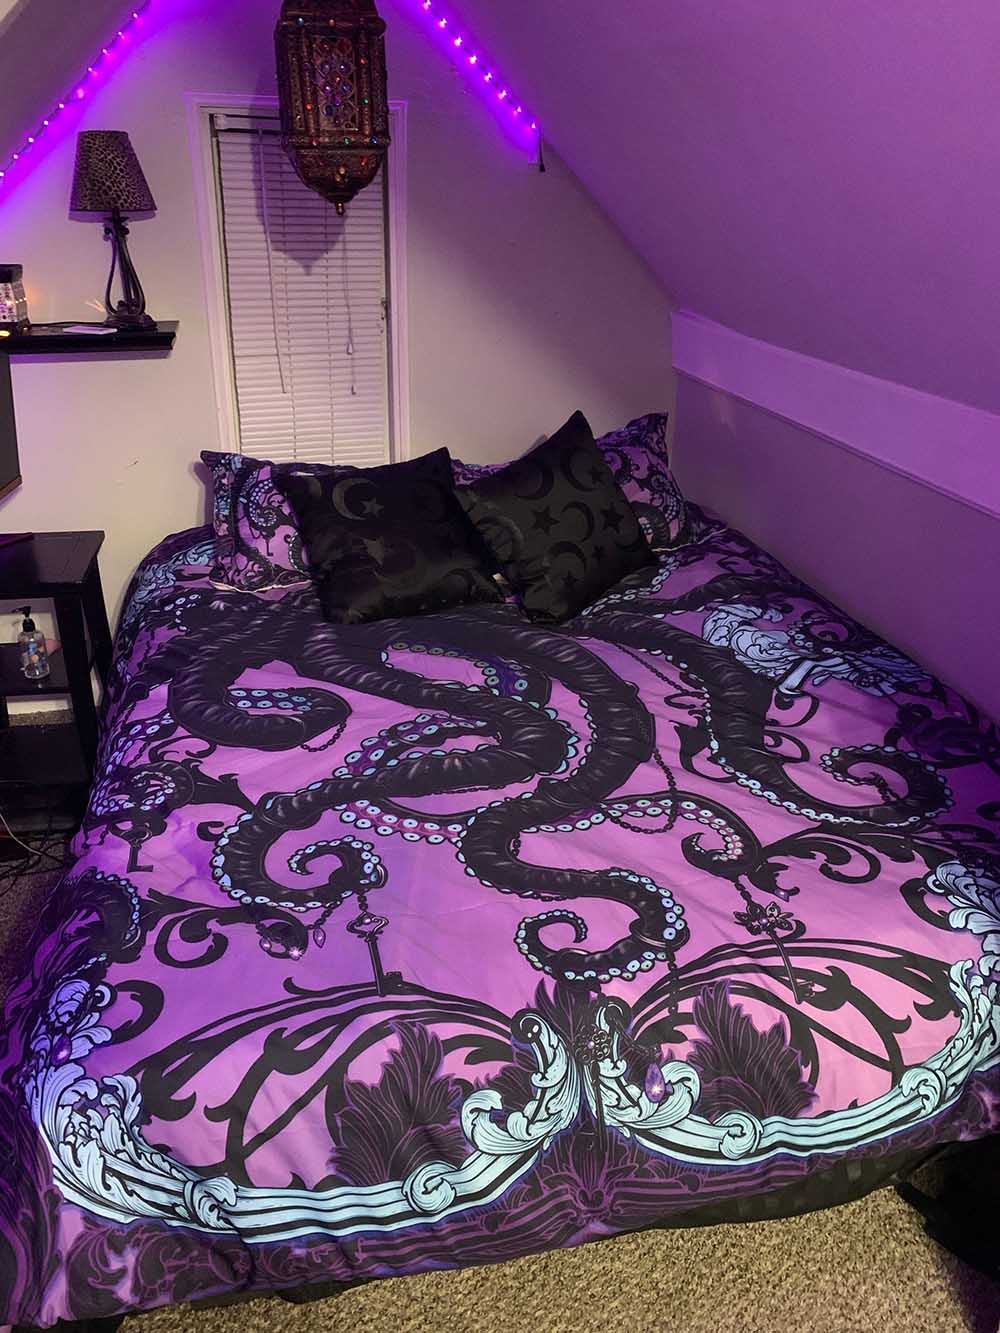 Abysm Internal Pastel Goth Duvet Cover and Comforter Image Review